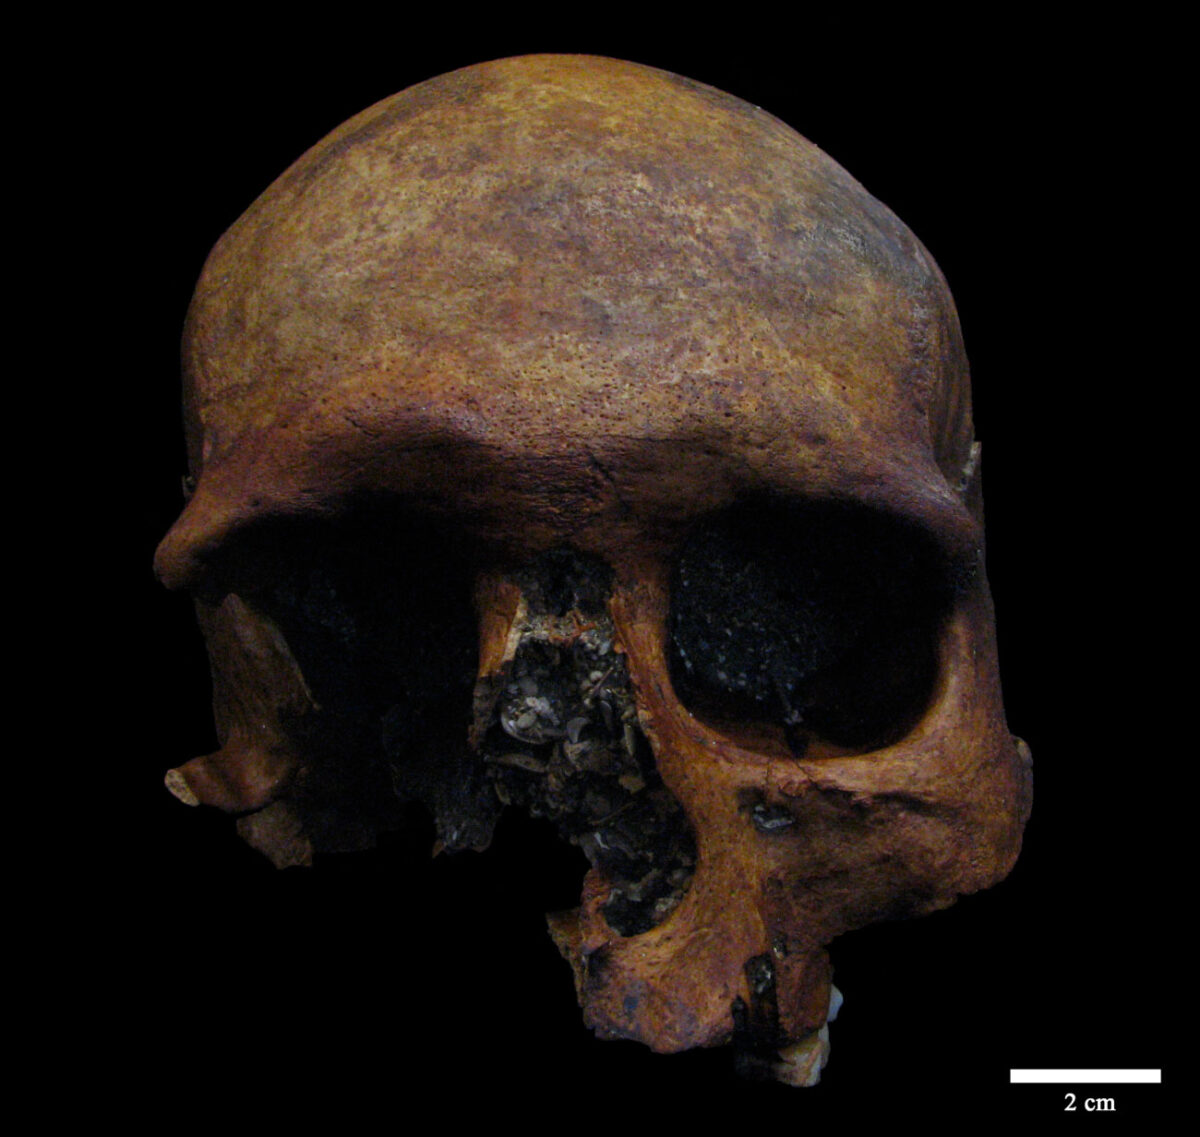 The cranium was discovered during a caving expedition to the Sima de Marcenejas, in Lastras de Teza (Burgos), thanks to the collaboration of the caving groups Gaem, Takomano, Geoda, Flash, and A.E.Get, which played a fundamental role in its recovery. 